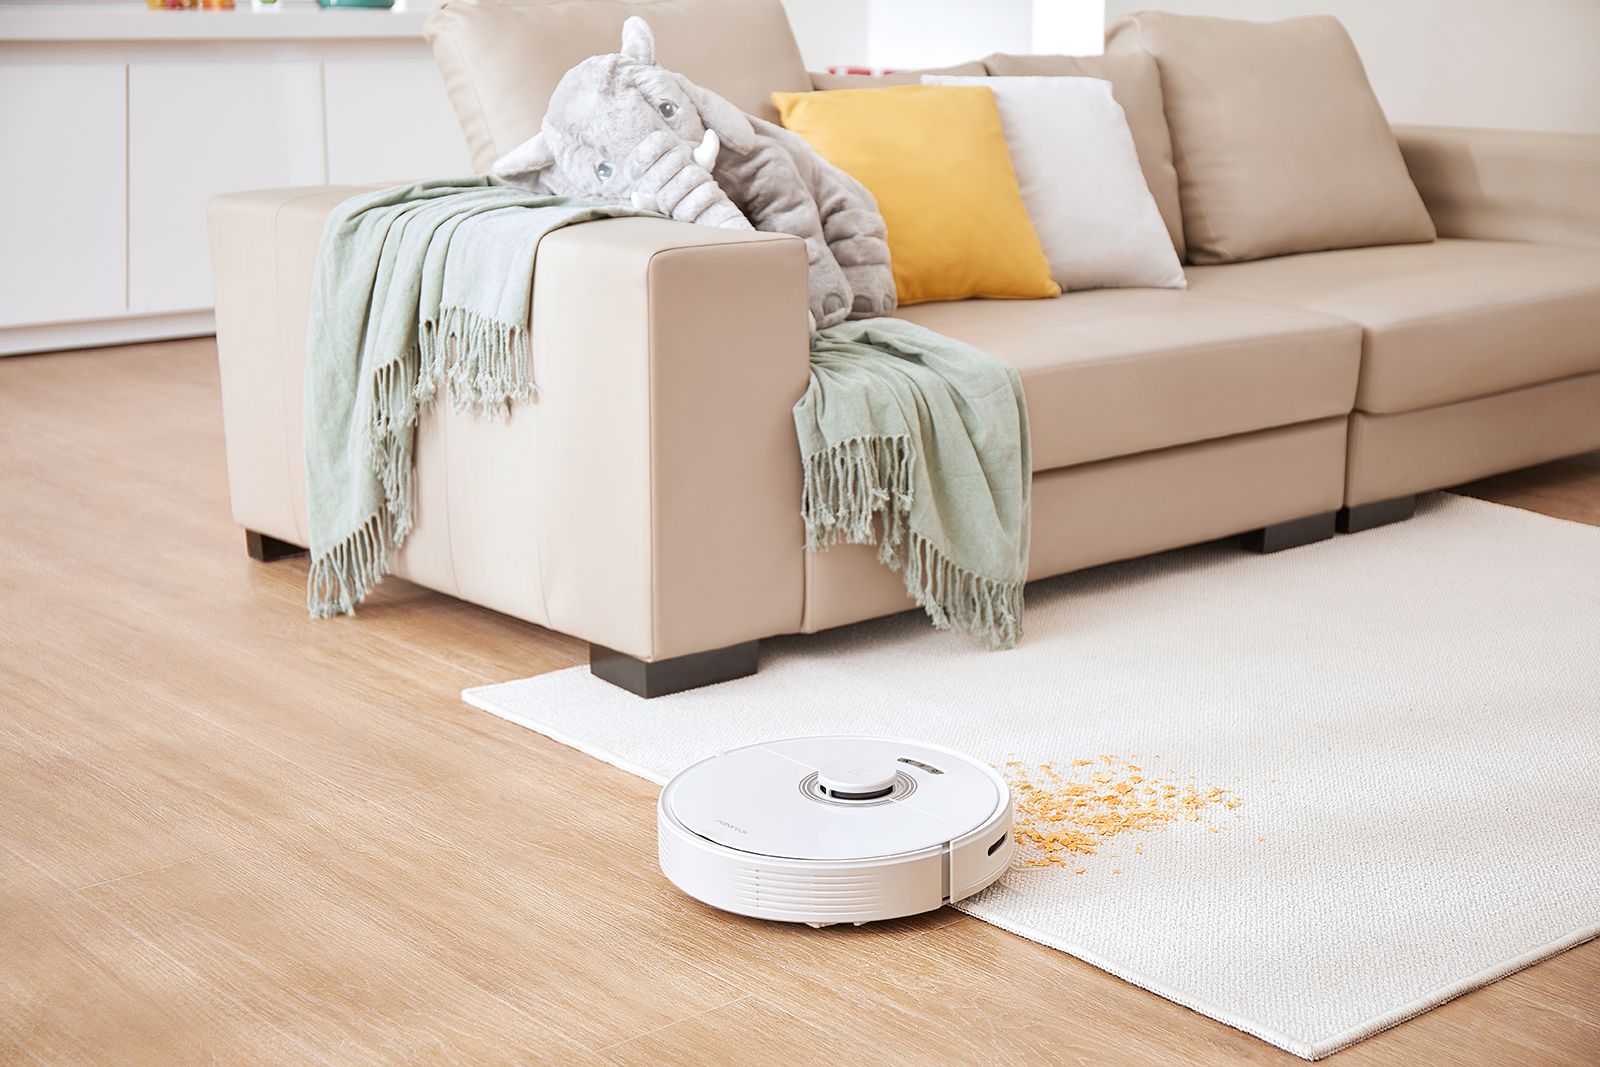 The Roborock Q7 Max vacuum cleans dirt from carpets